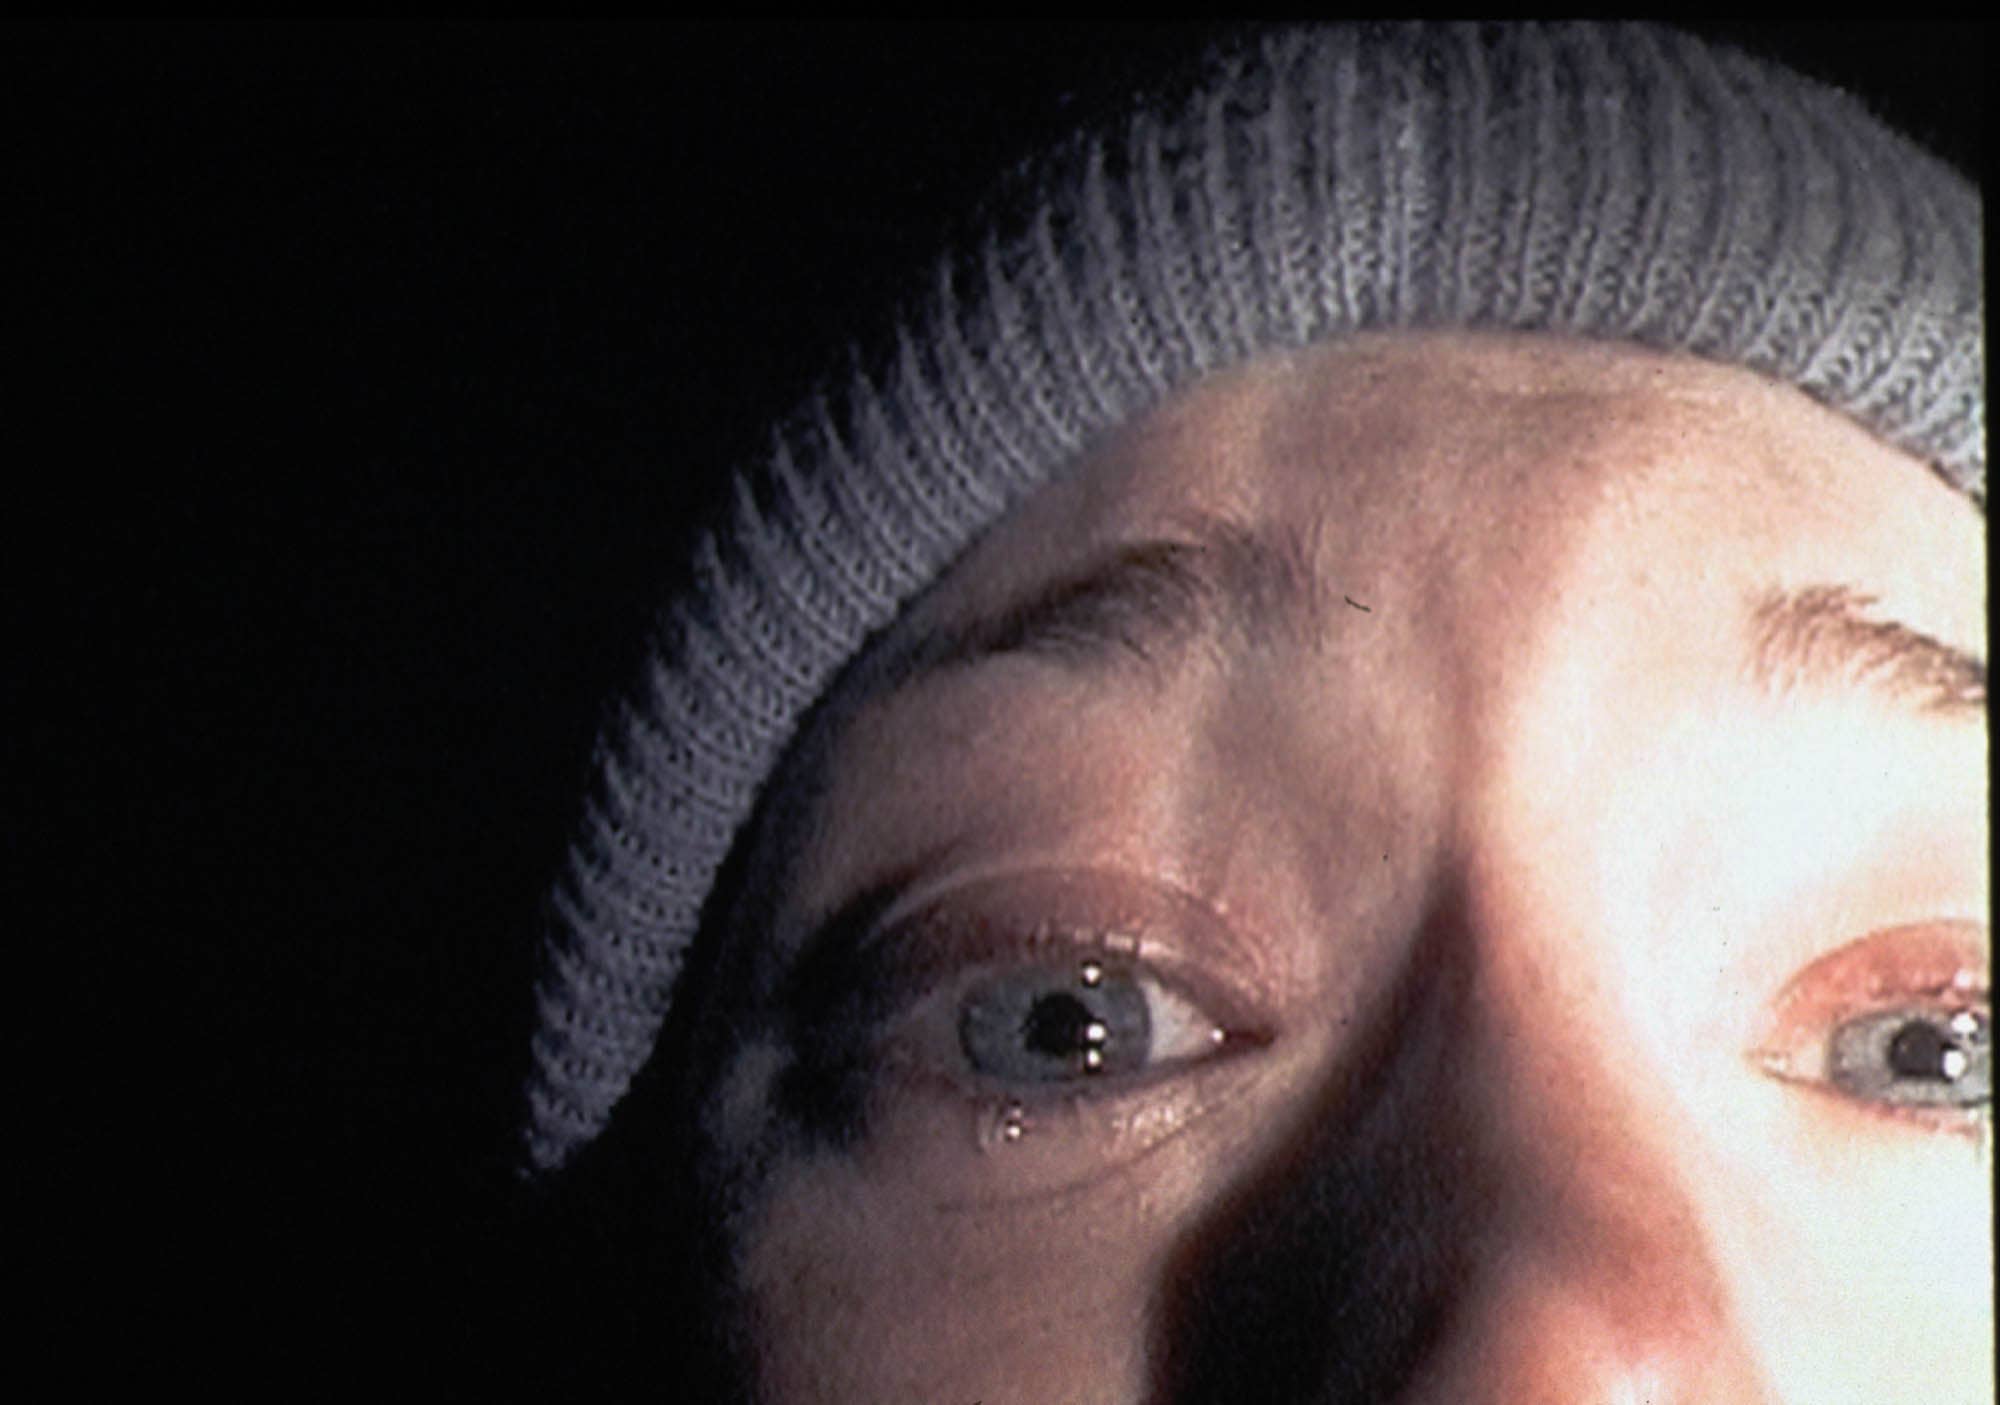 Heather Donahue turns the camera on herself during 'The Blair Witch Project'